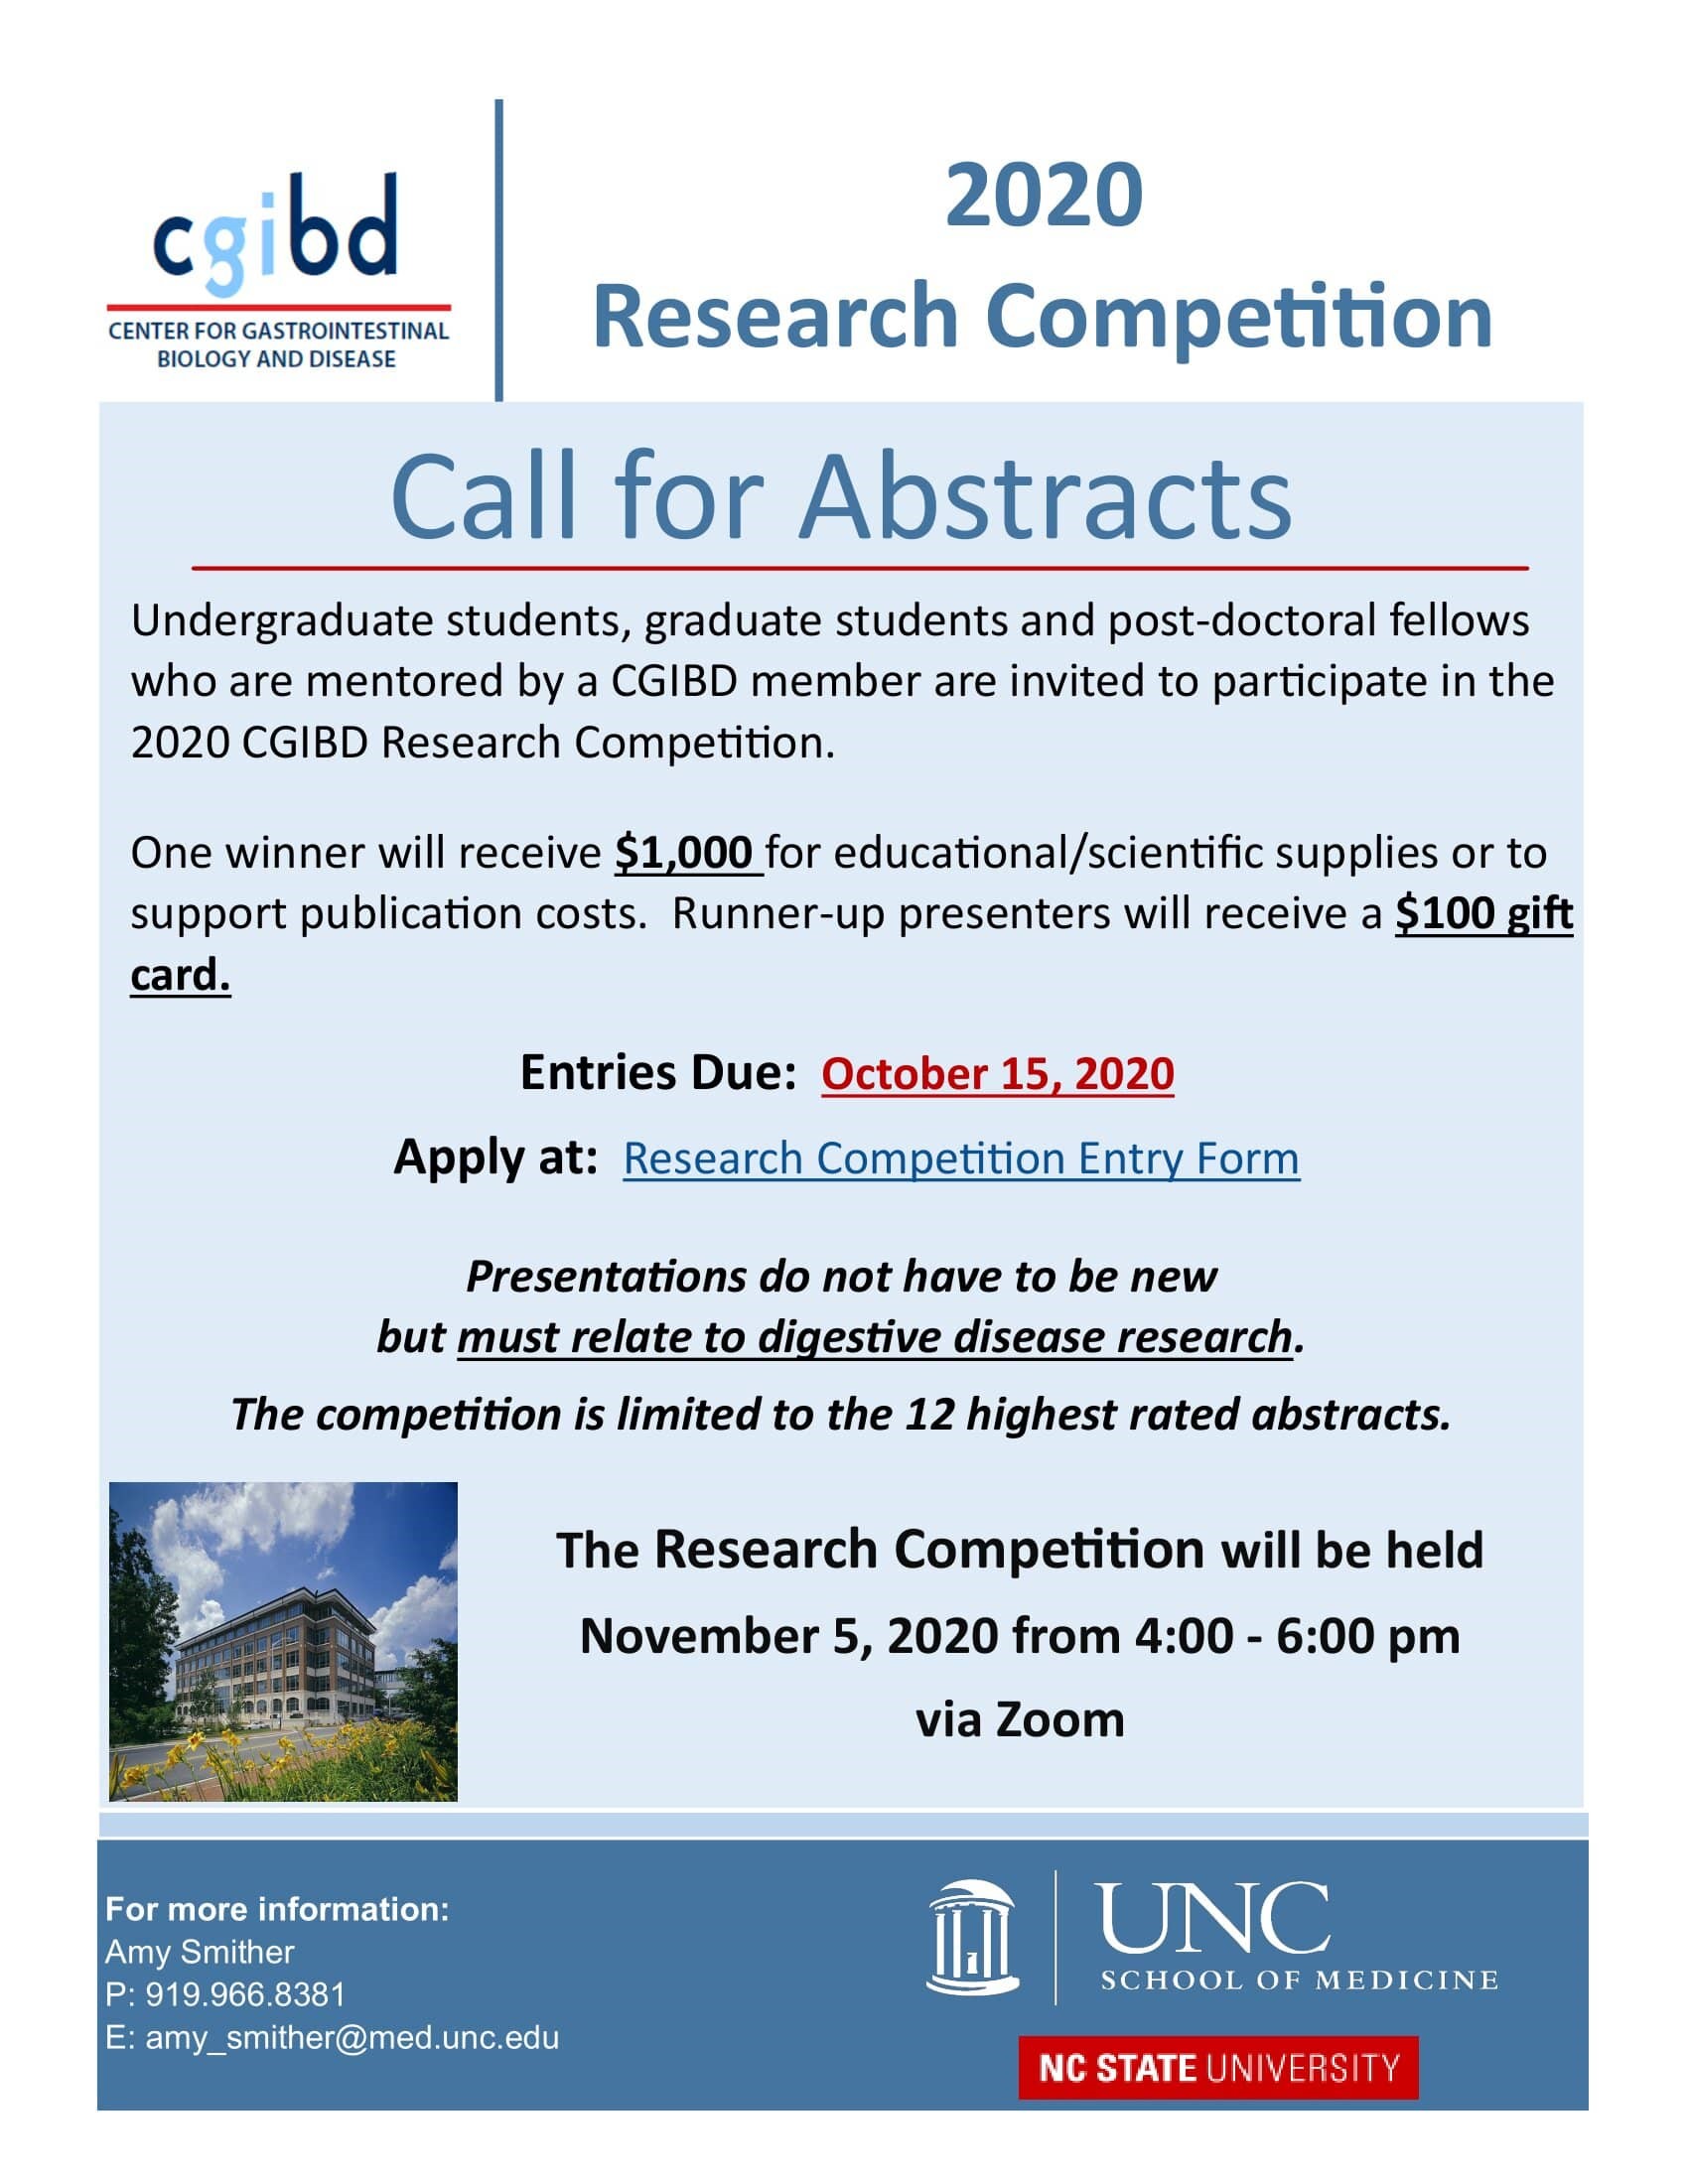 2020 CGIBD Research Competition Flyer